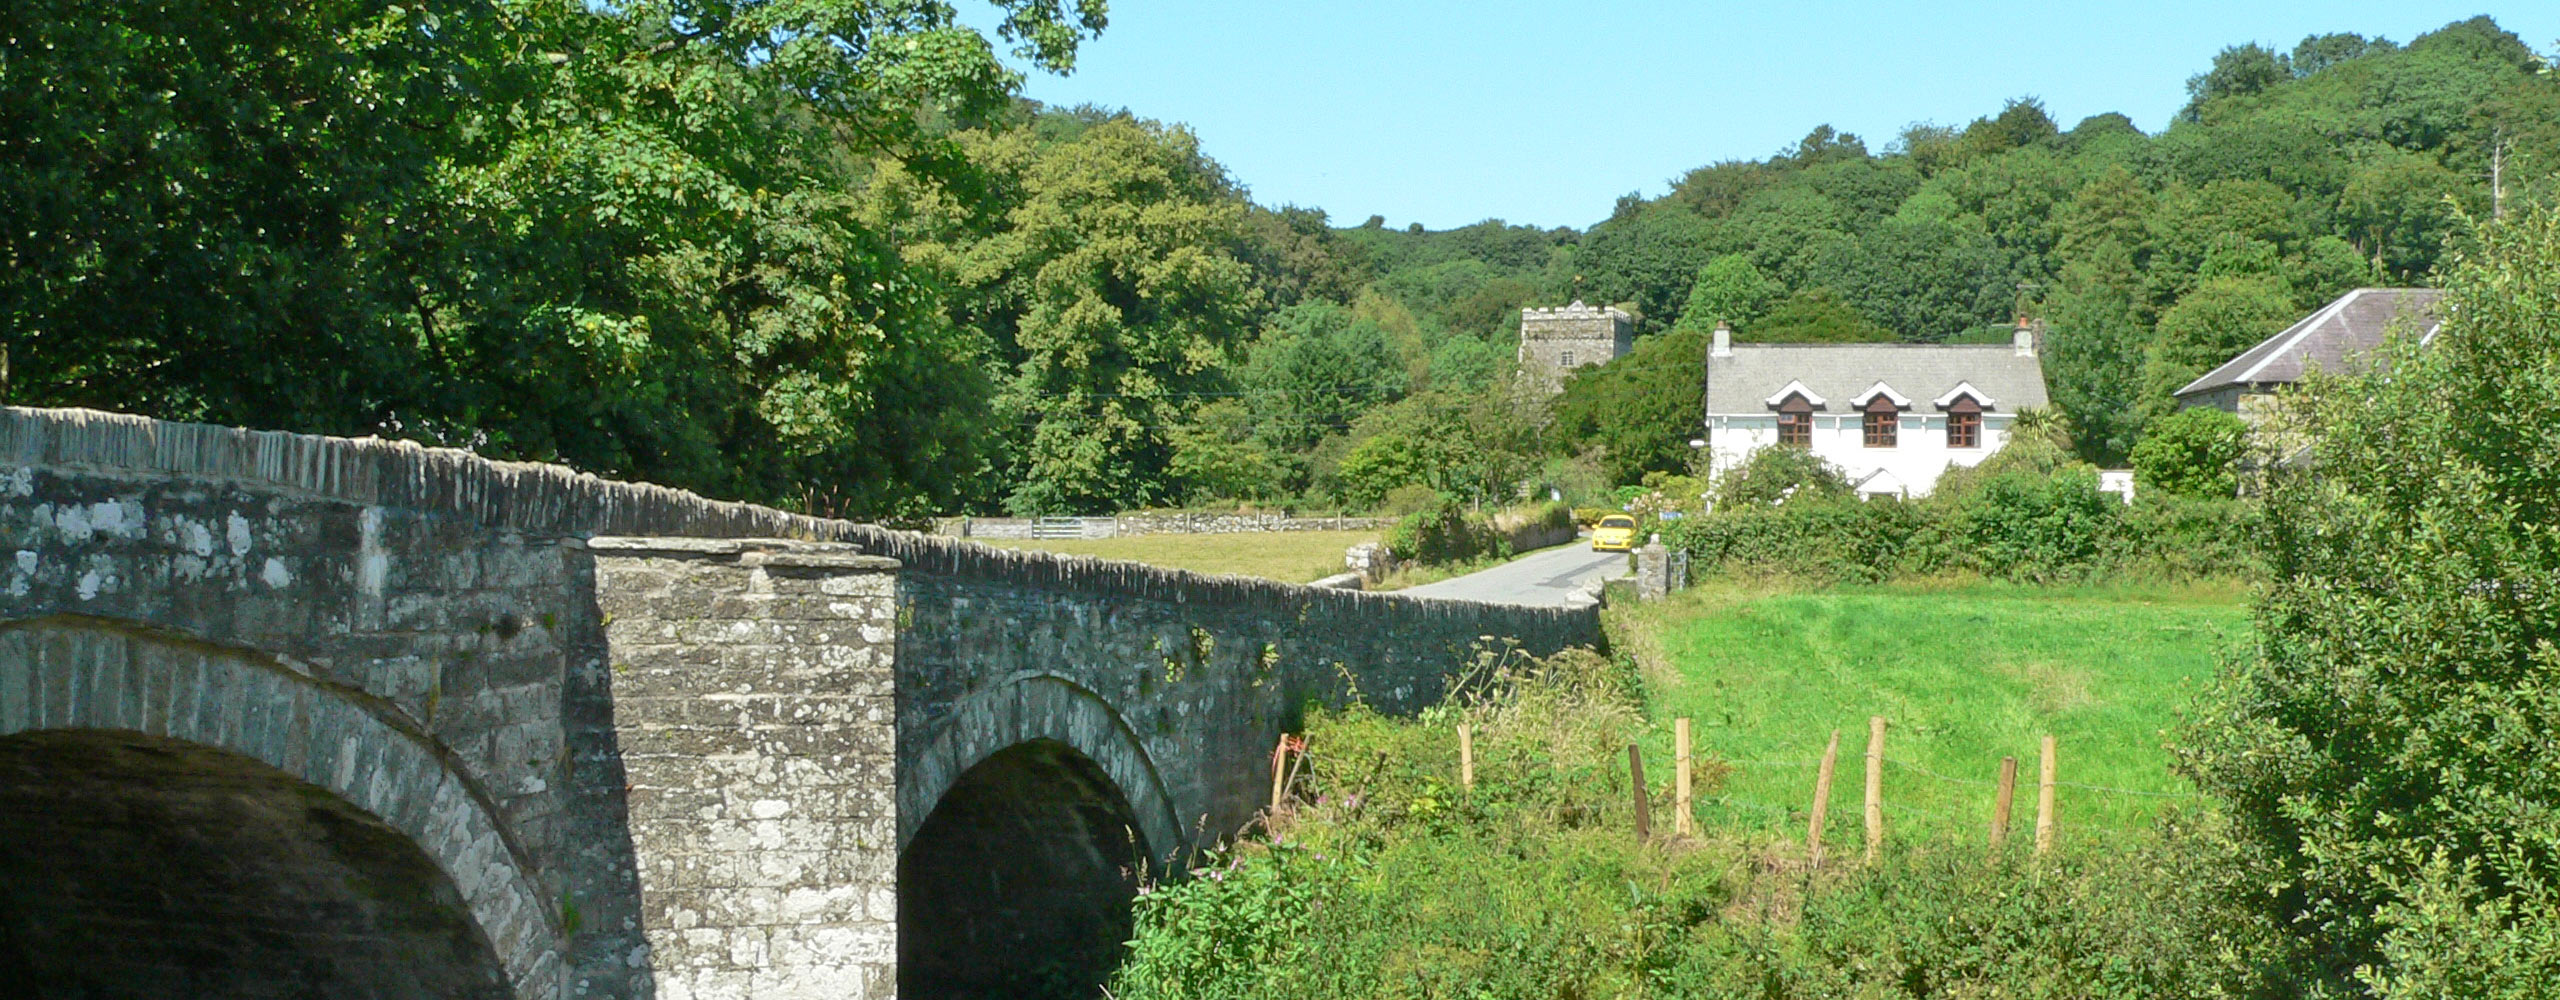 Nevern Village and Church